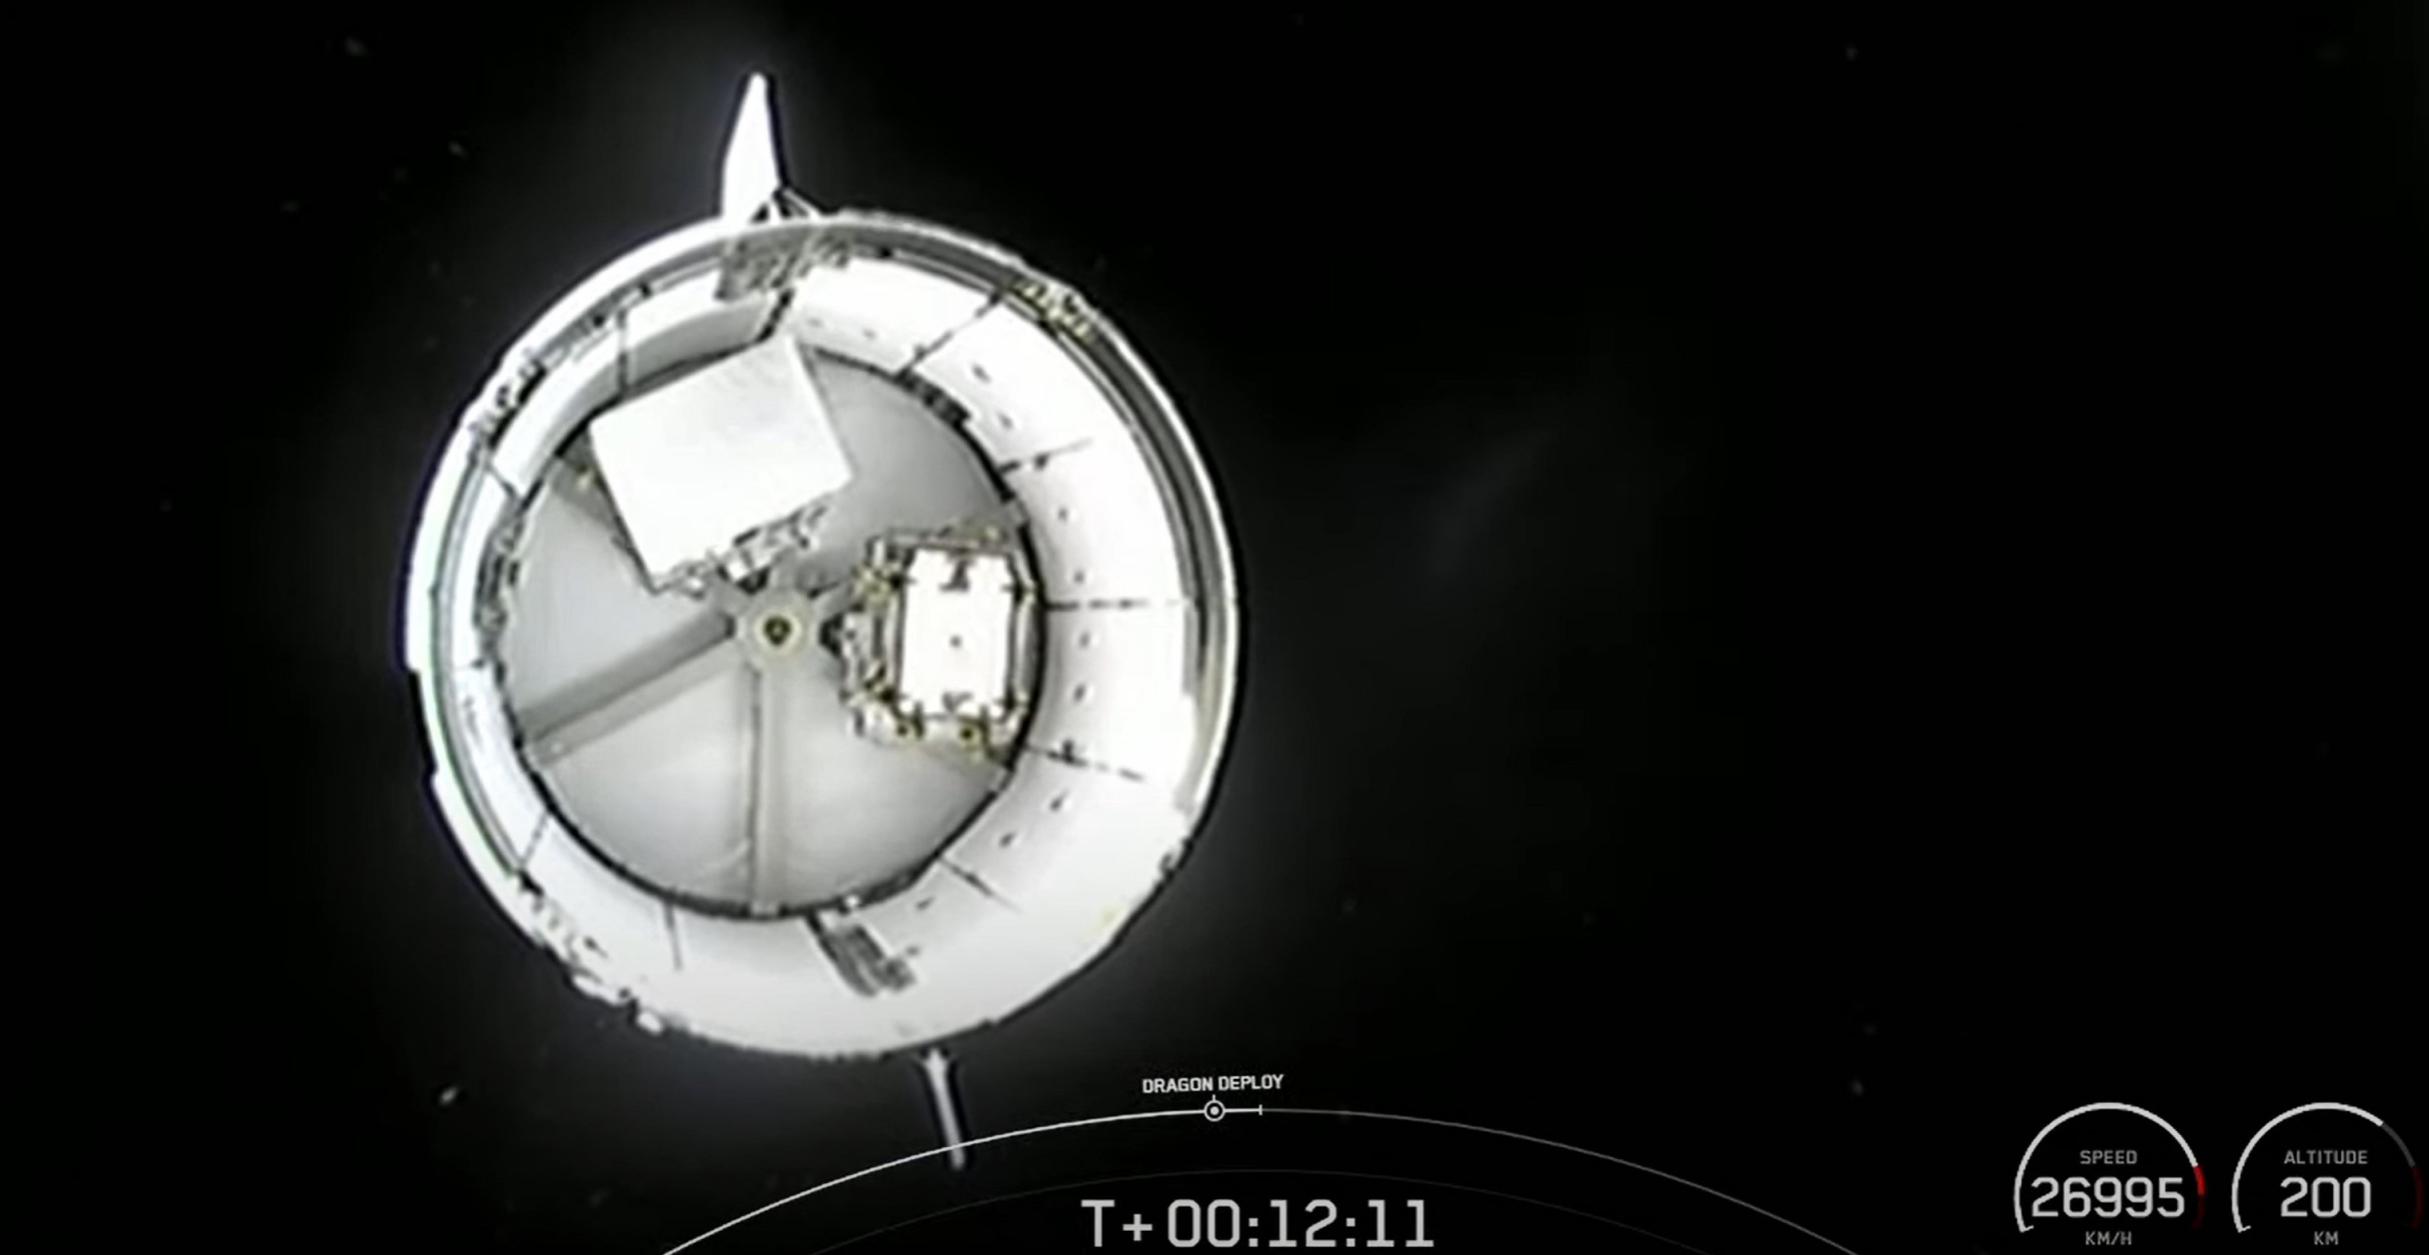 CRS-25 Dragon C208 F9 B1067 39A 071422 webcast (SpaceX) deploy 1 (C)